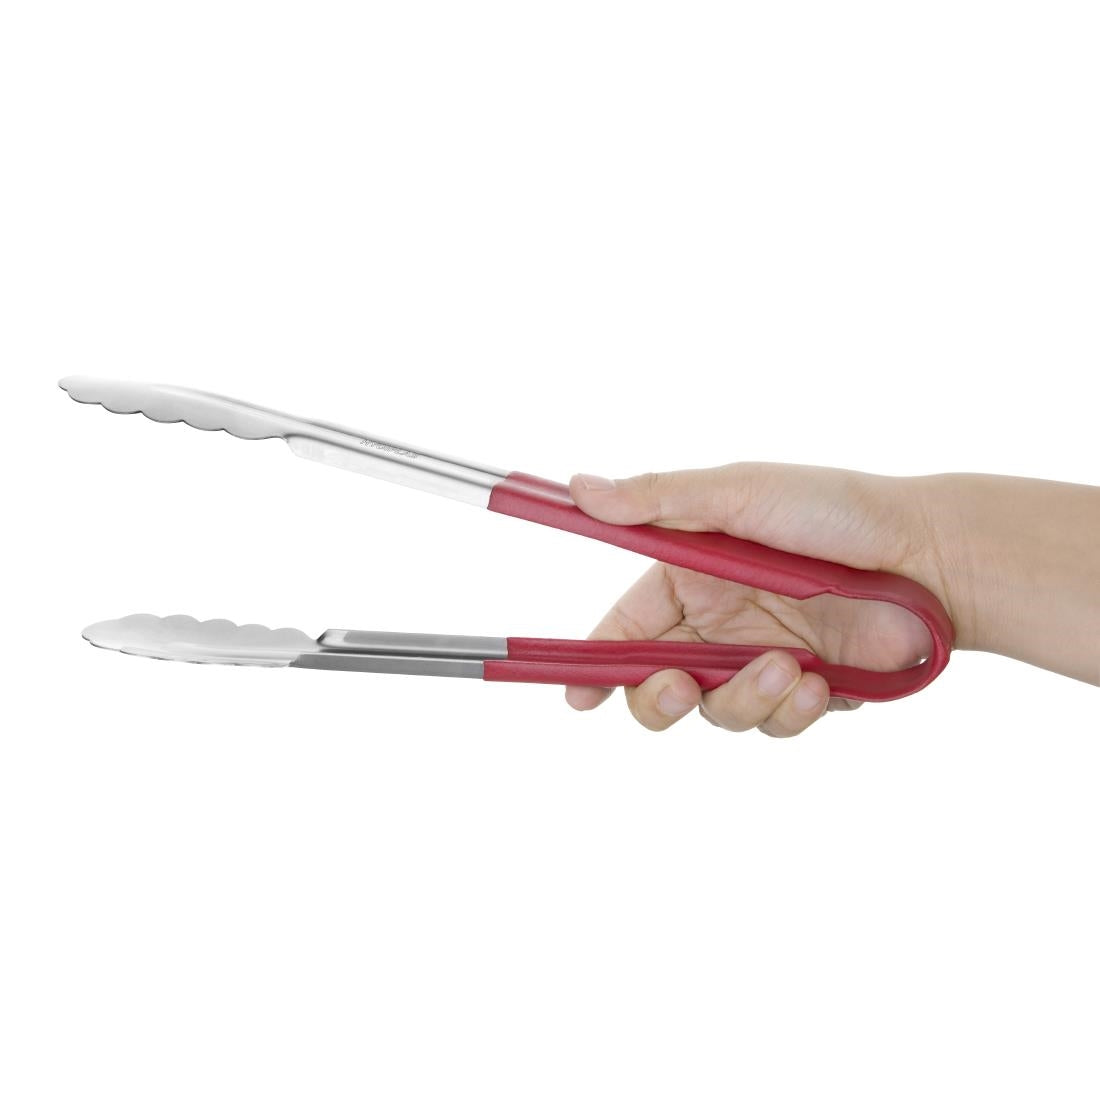 Vogue Colour Coded Red Serving Tongs 11"